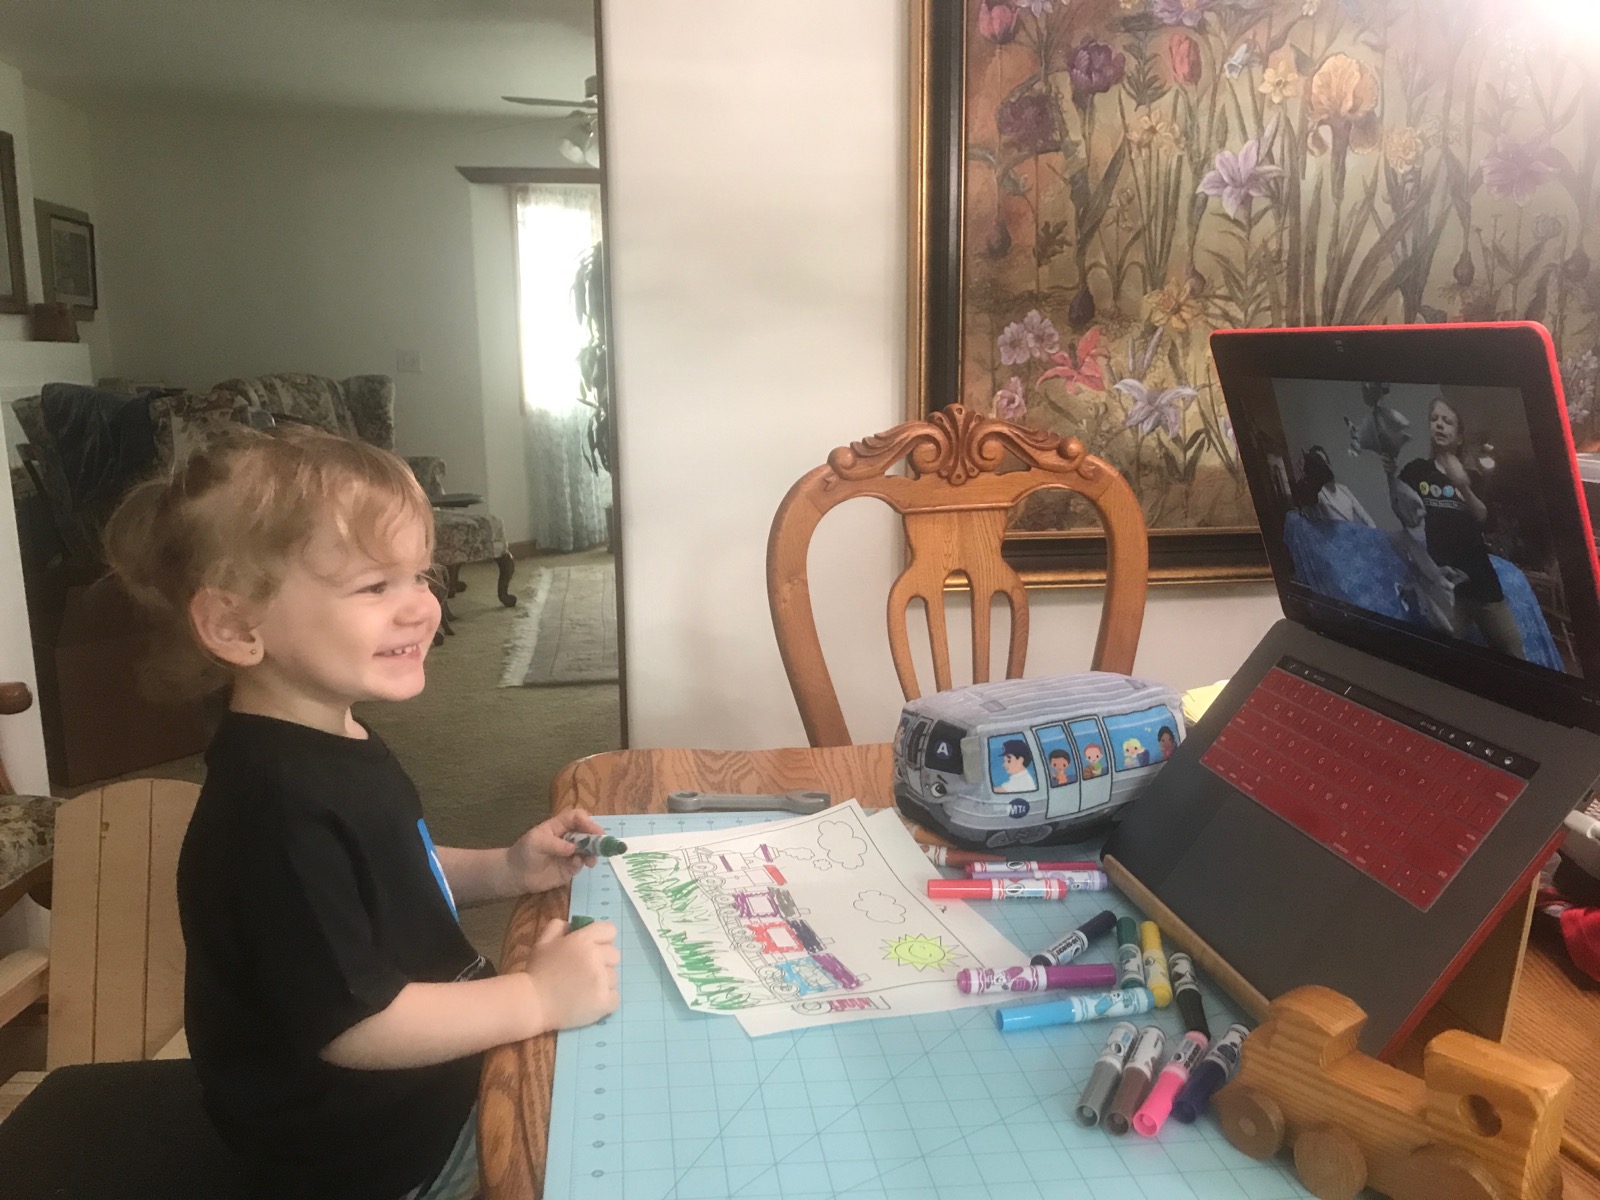 Child makes art at a table at home and smiles at a Museum educator on a computer screen.